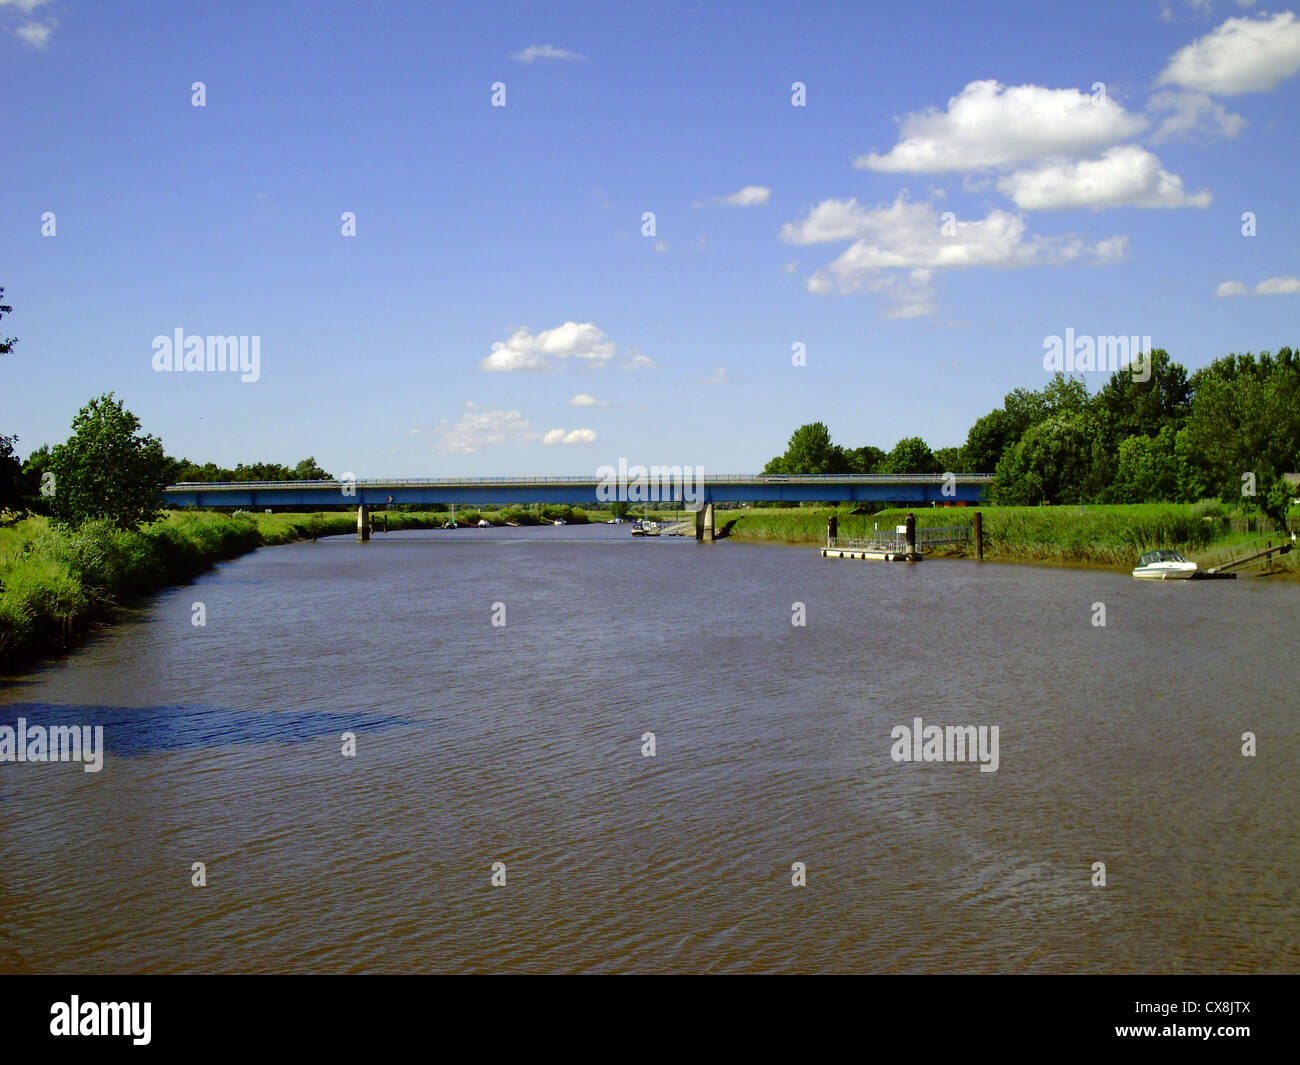 Oste river between Hemmoor and Osten, district of Cuxhaven, Lower Saxony, Germany Stock Photo